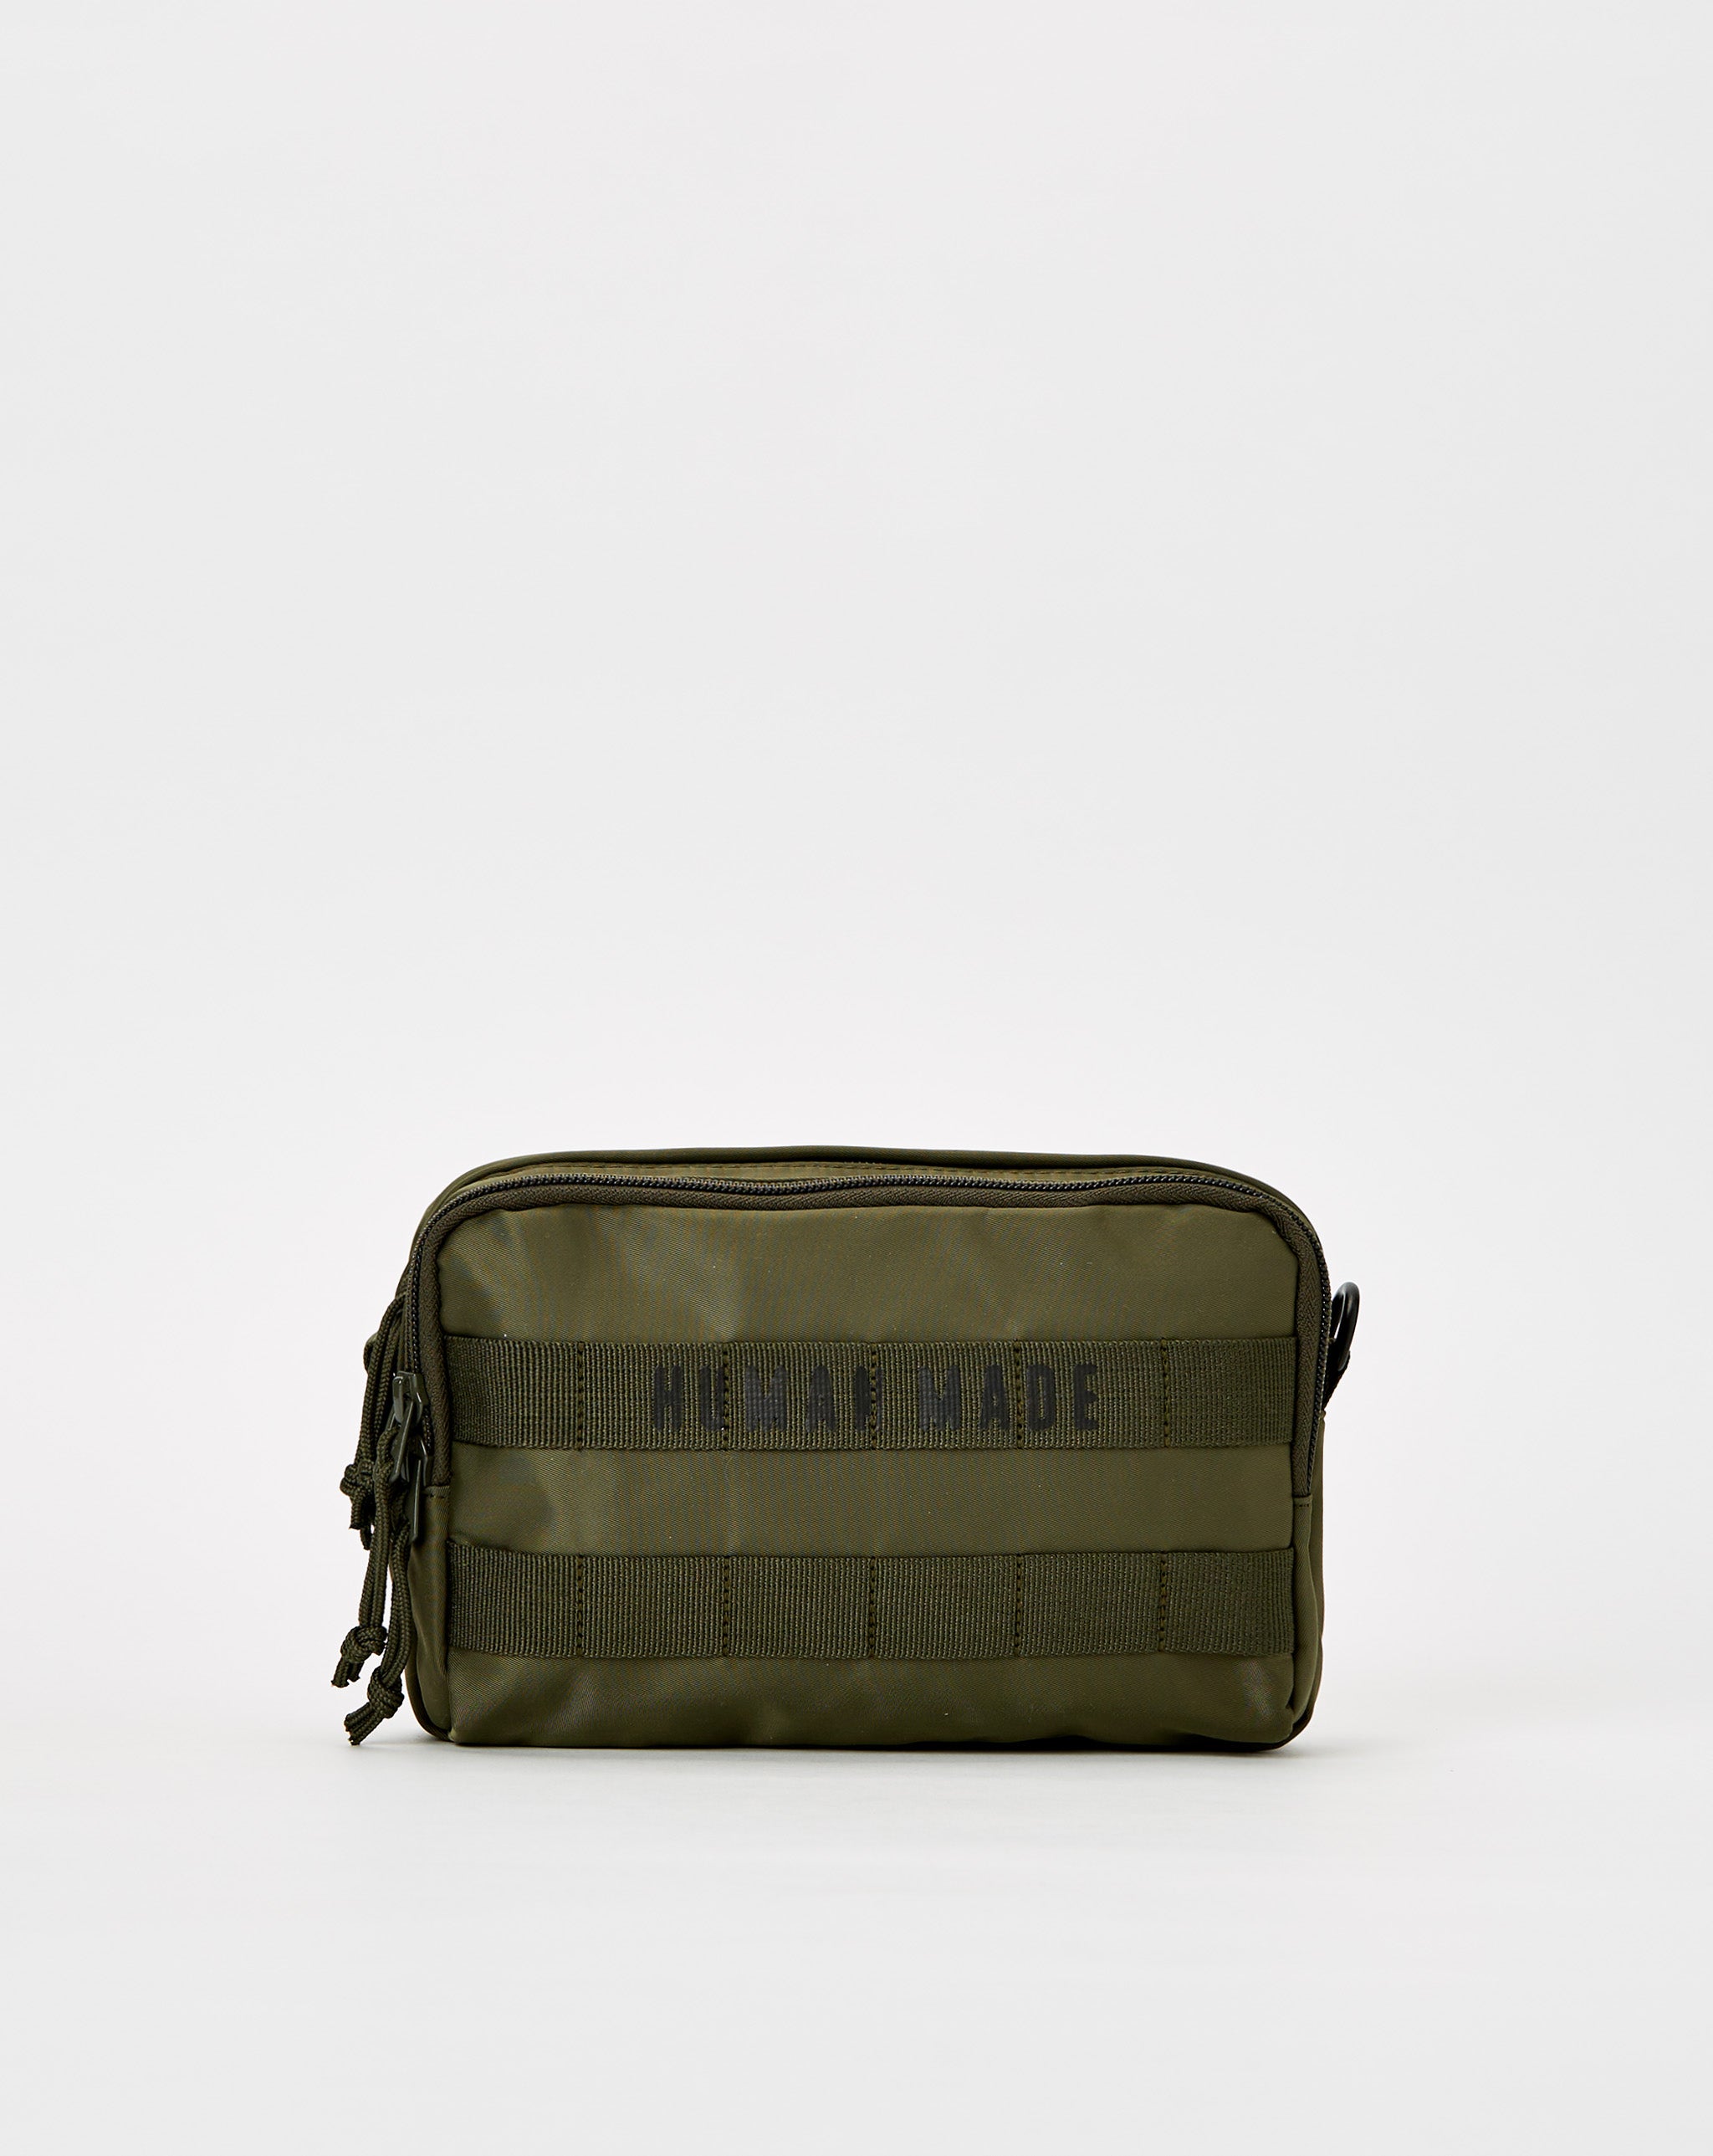 HUMAN MADE　MILITARY POUCH SMALL